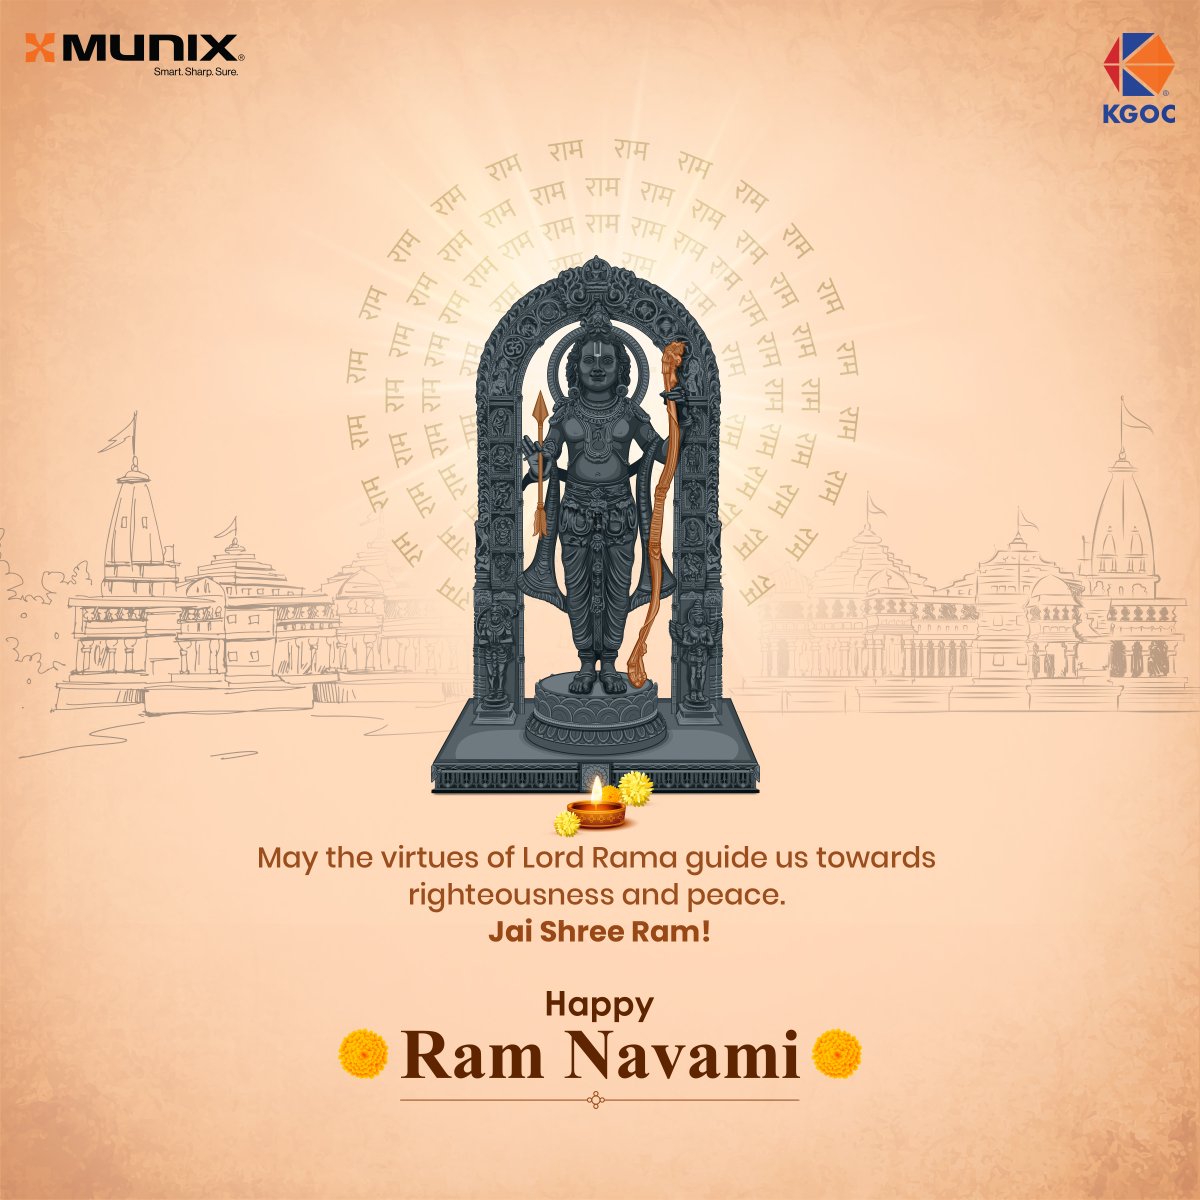 On this sacred day of Ram Navami, let's remember the ideals of courage, sacrifice, and devotion.

#Munix #kgoc #jaishreeram